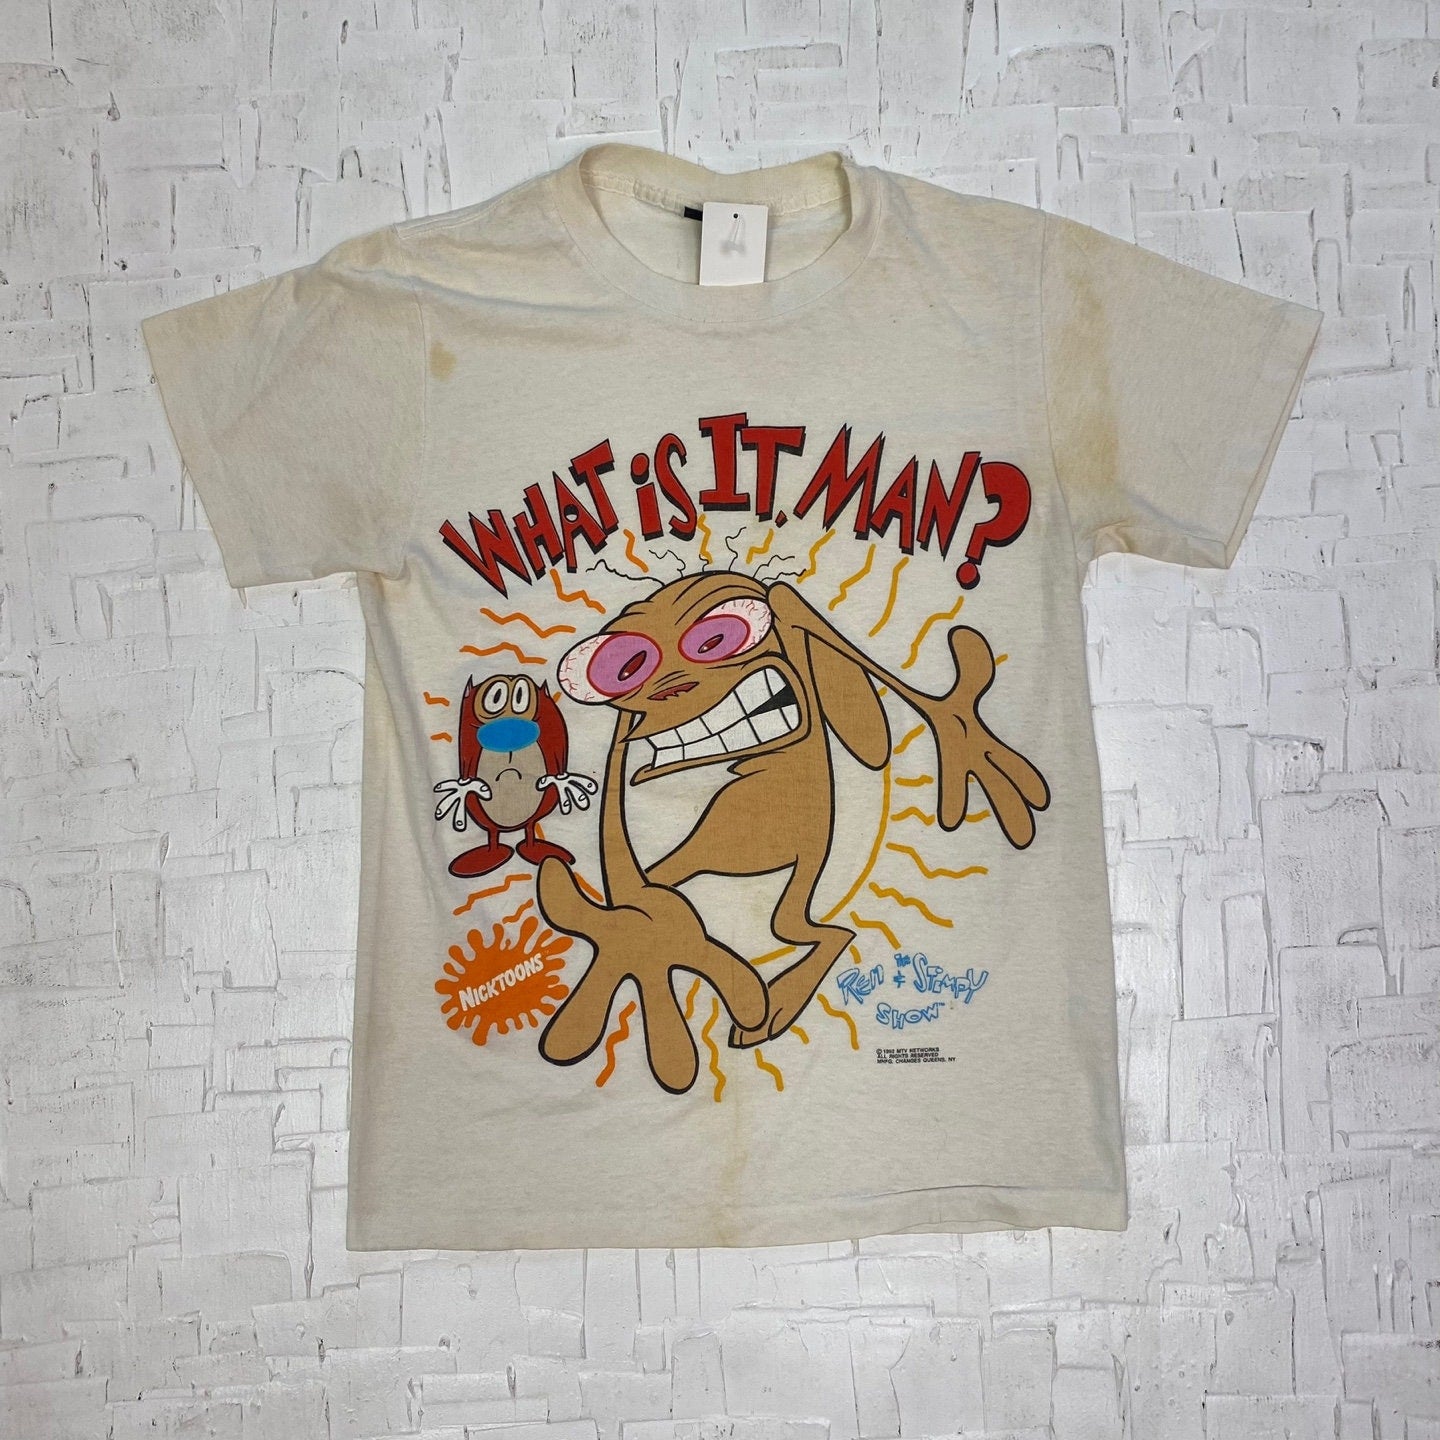 Vintage 1992 The Ren and Stimpy Show "What is it Man?" Graphic T-Shirt | Vintage Graphic T-Shirt | NickToon Tee | SKU M-3106 |